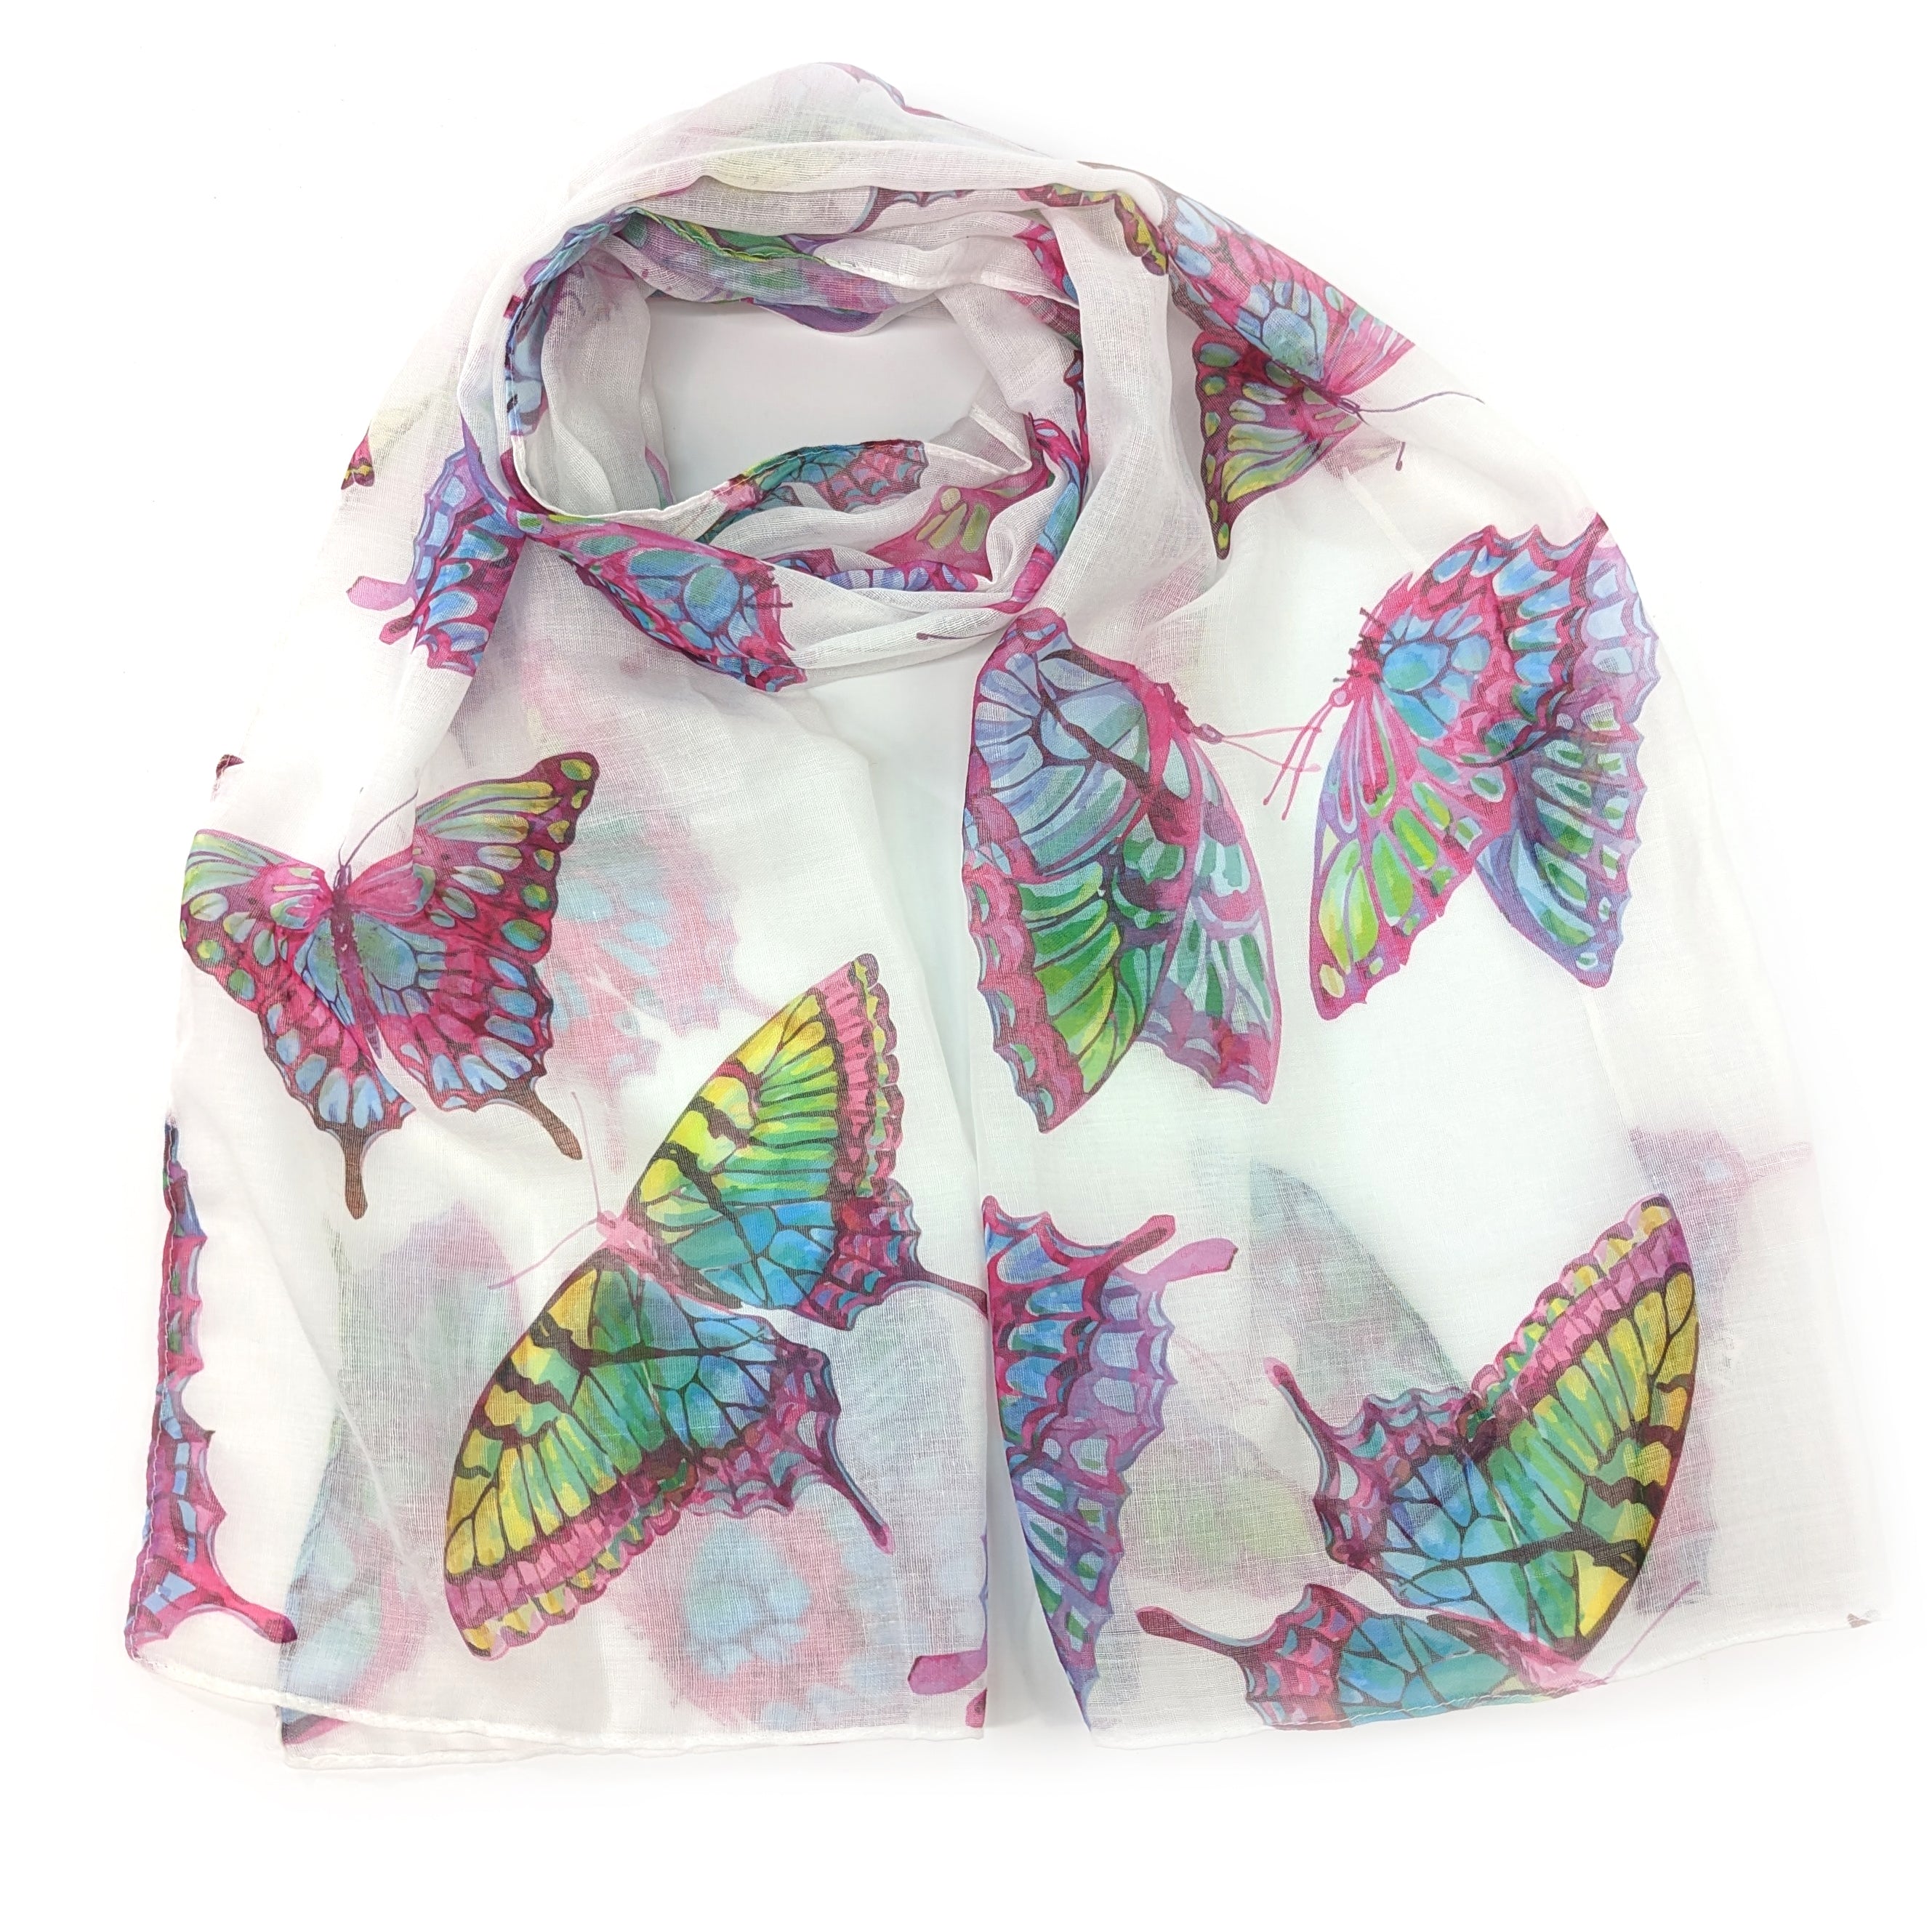 Sissonne - Bright Butterfly Scarf (50x180cm) - Pink